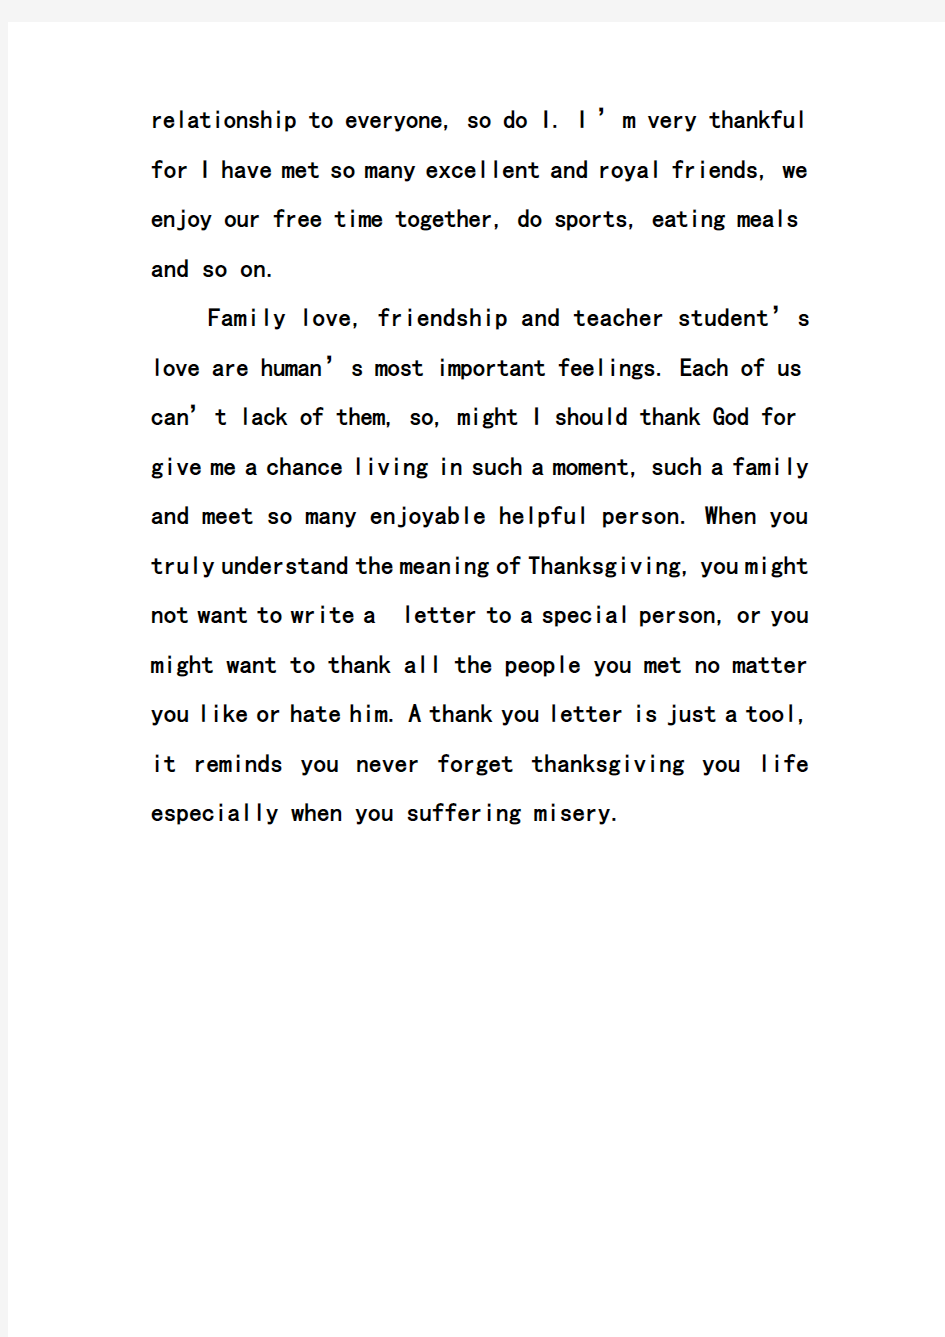 A thank you letter